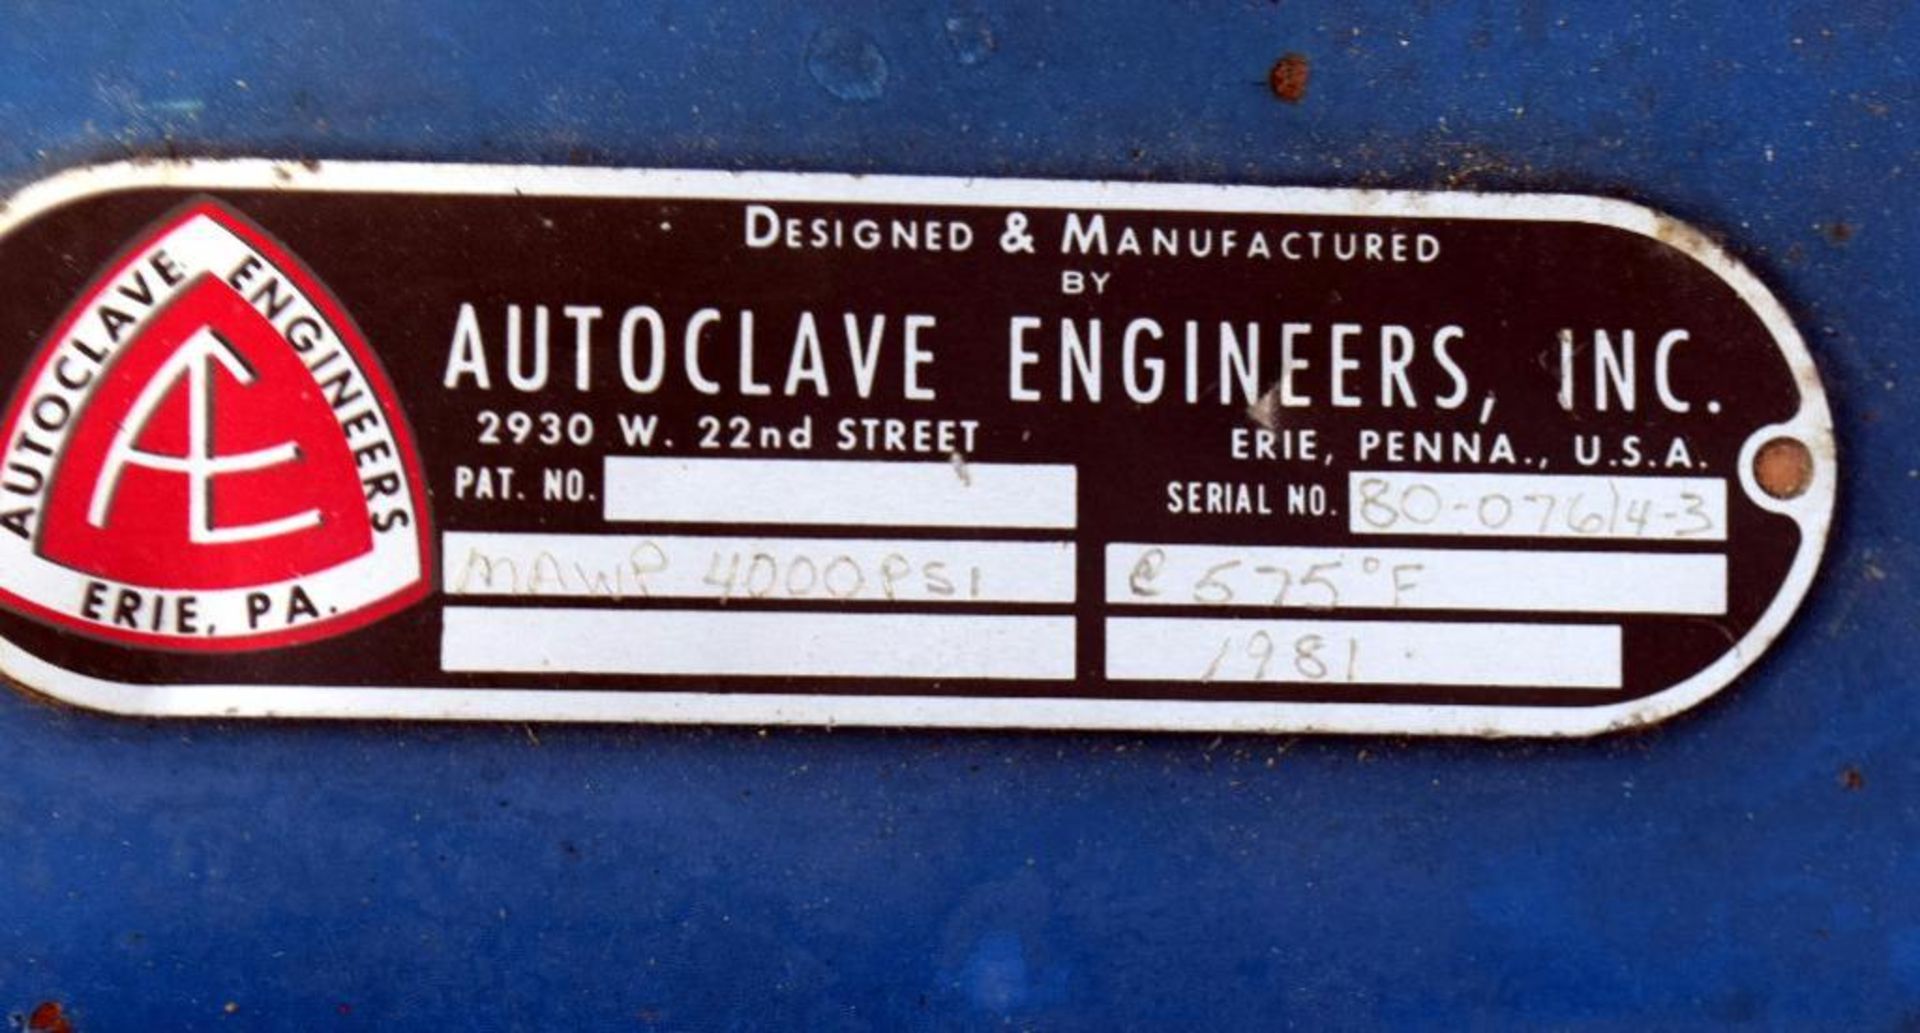 Autoclave Engineers Autoclave, 0.1 Gallon, Inconel 600. Vessel approximate 2-1/4" diameter x 7-1/2" - Image 7 of 7